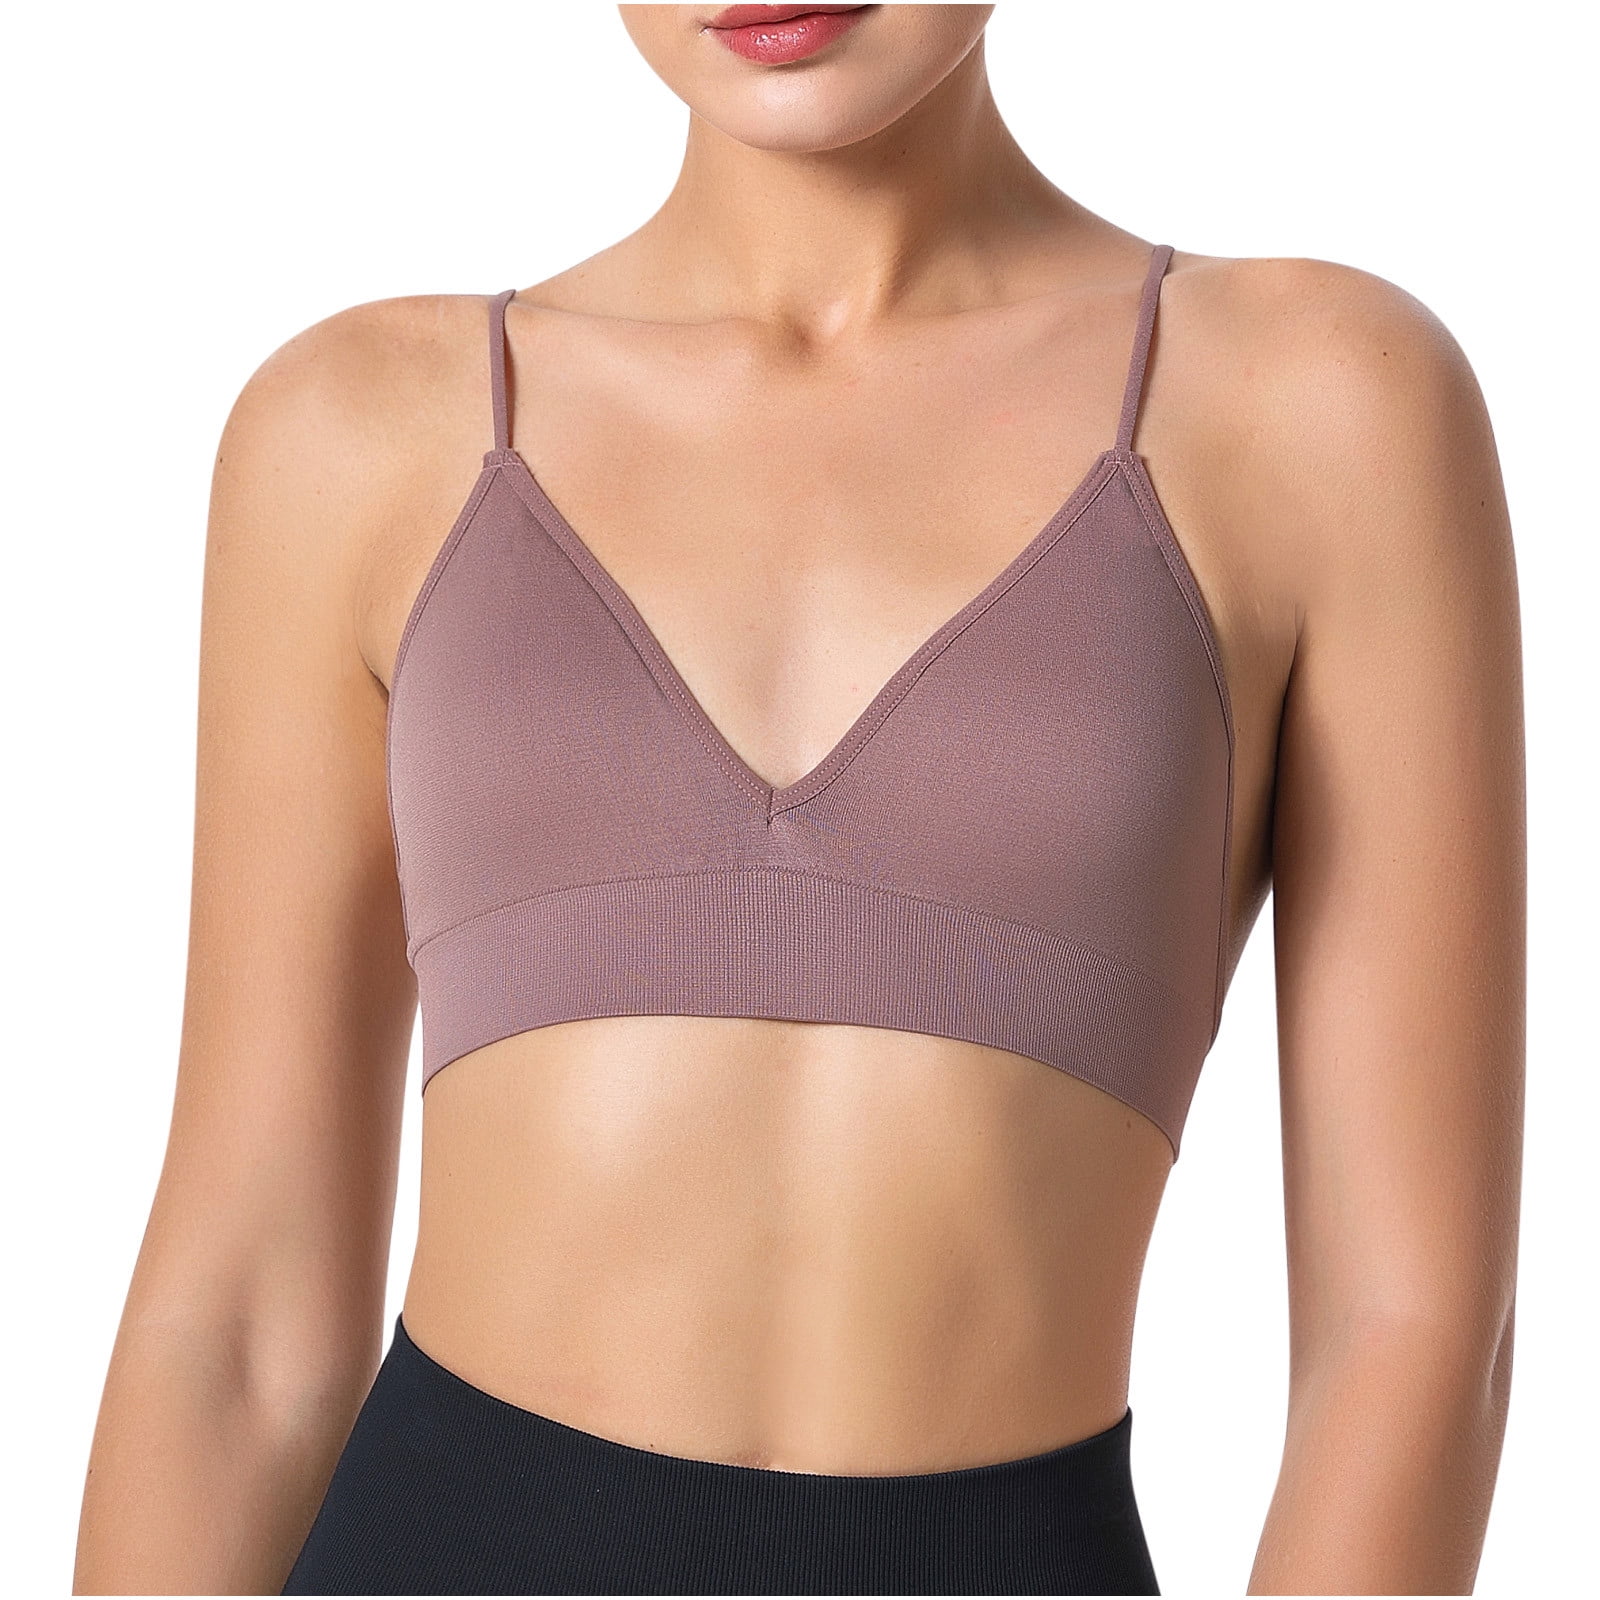 Mrat Clearance Breezies Bras Clearance Comfort Oman Bras with